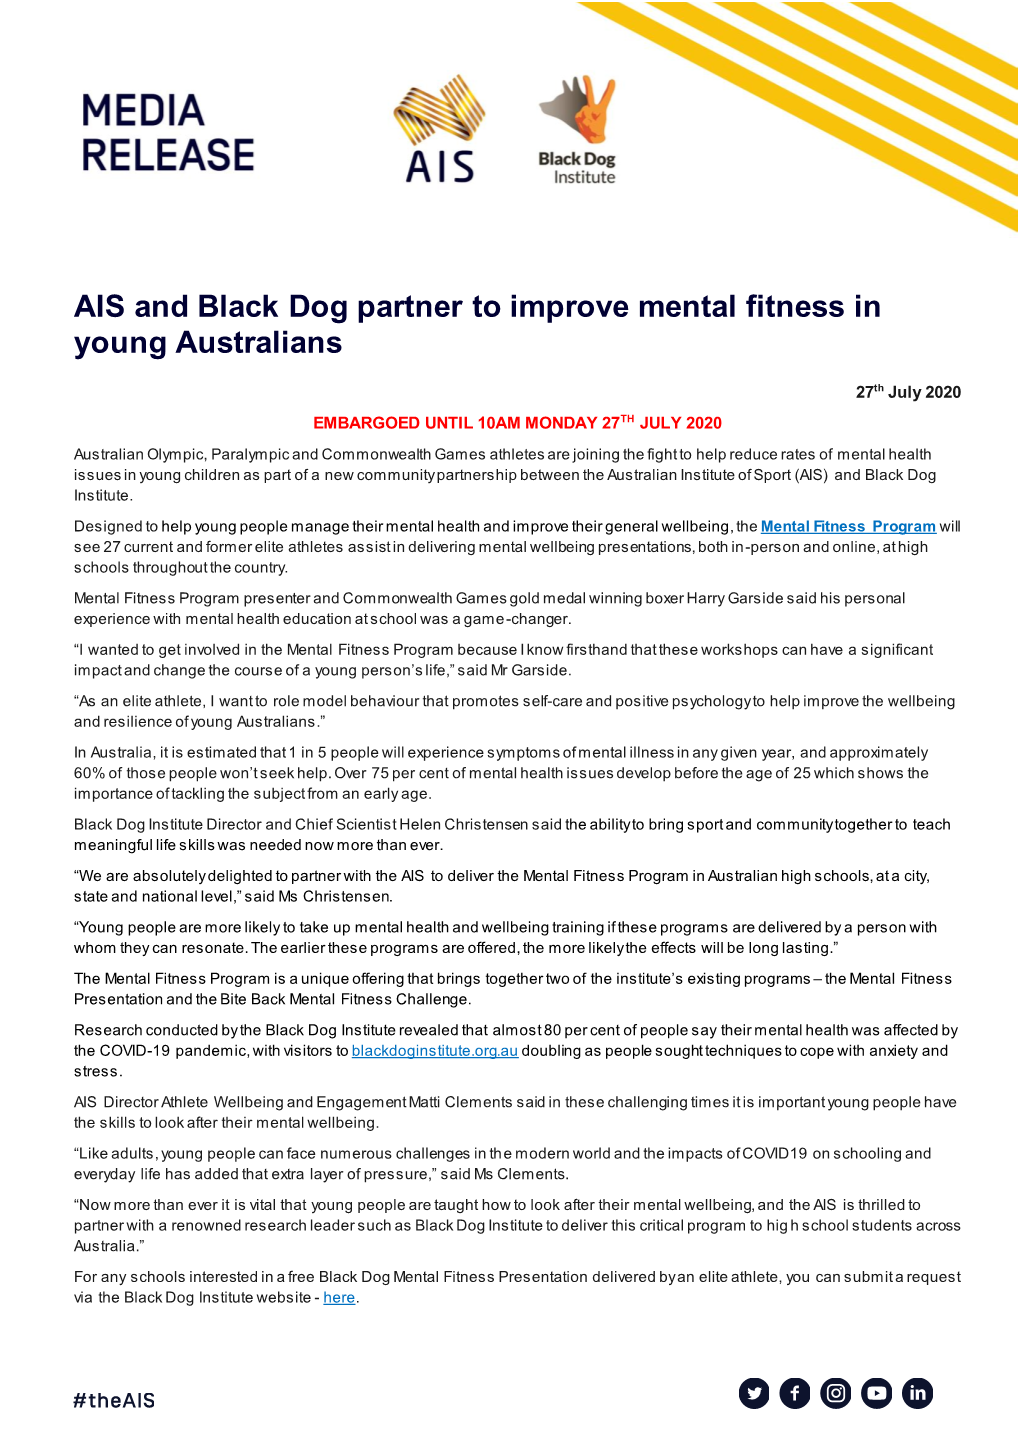 AIS and Black Dog Partner to Improve Mental Fitness in Young Australians